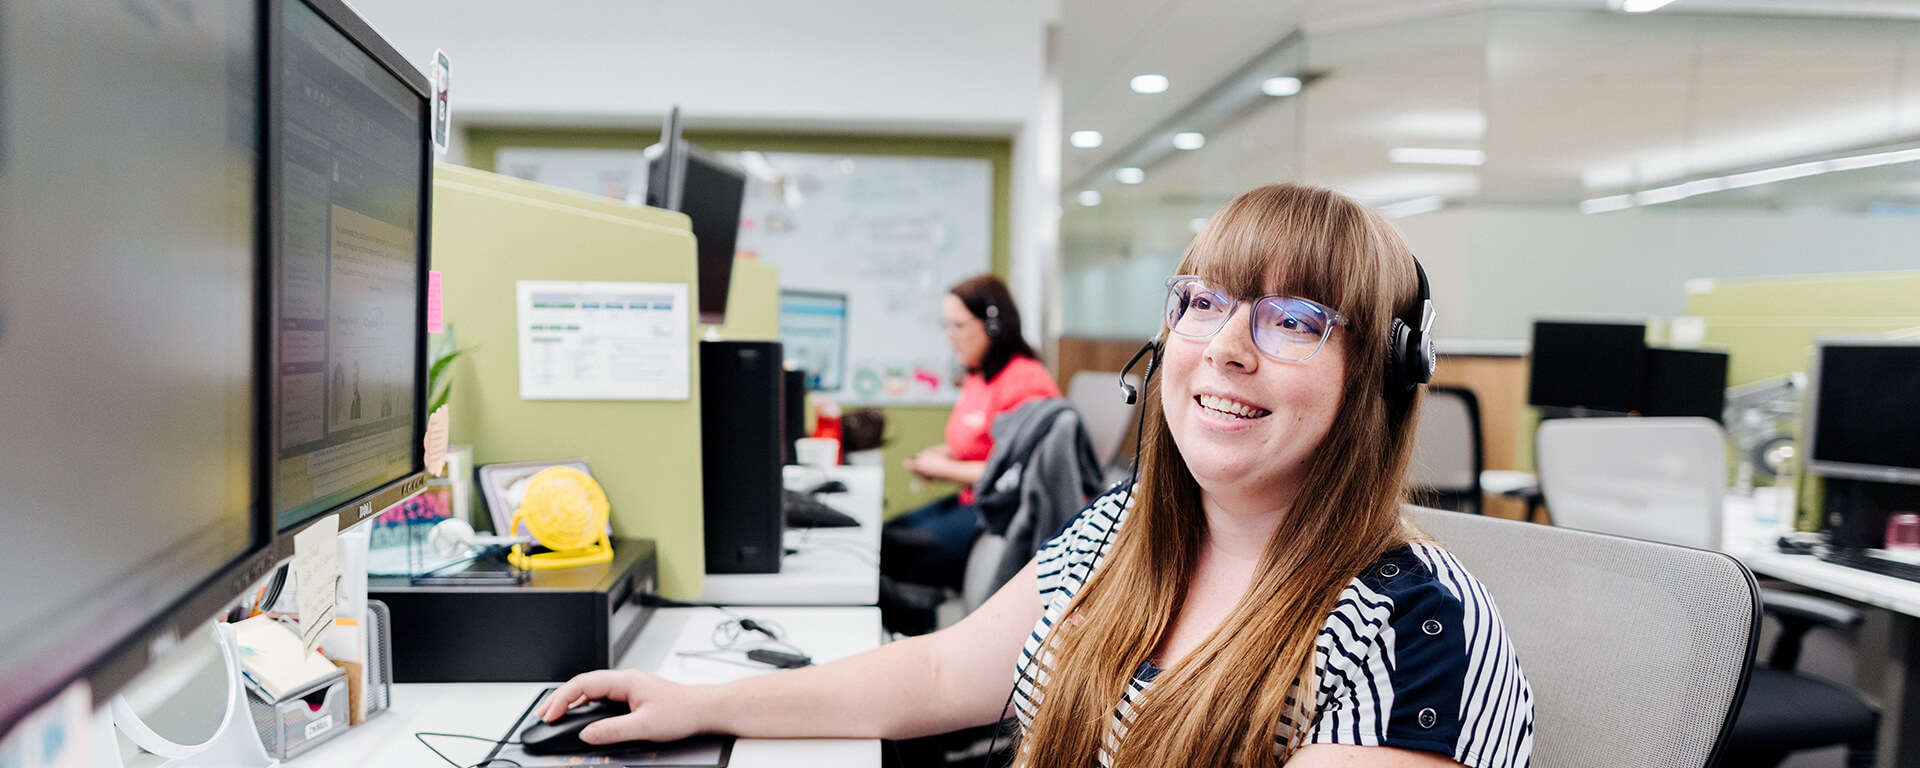 Capital One Customer Care associate talks about finding success in her role